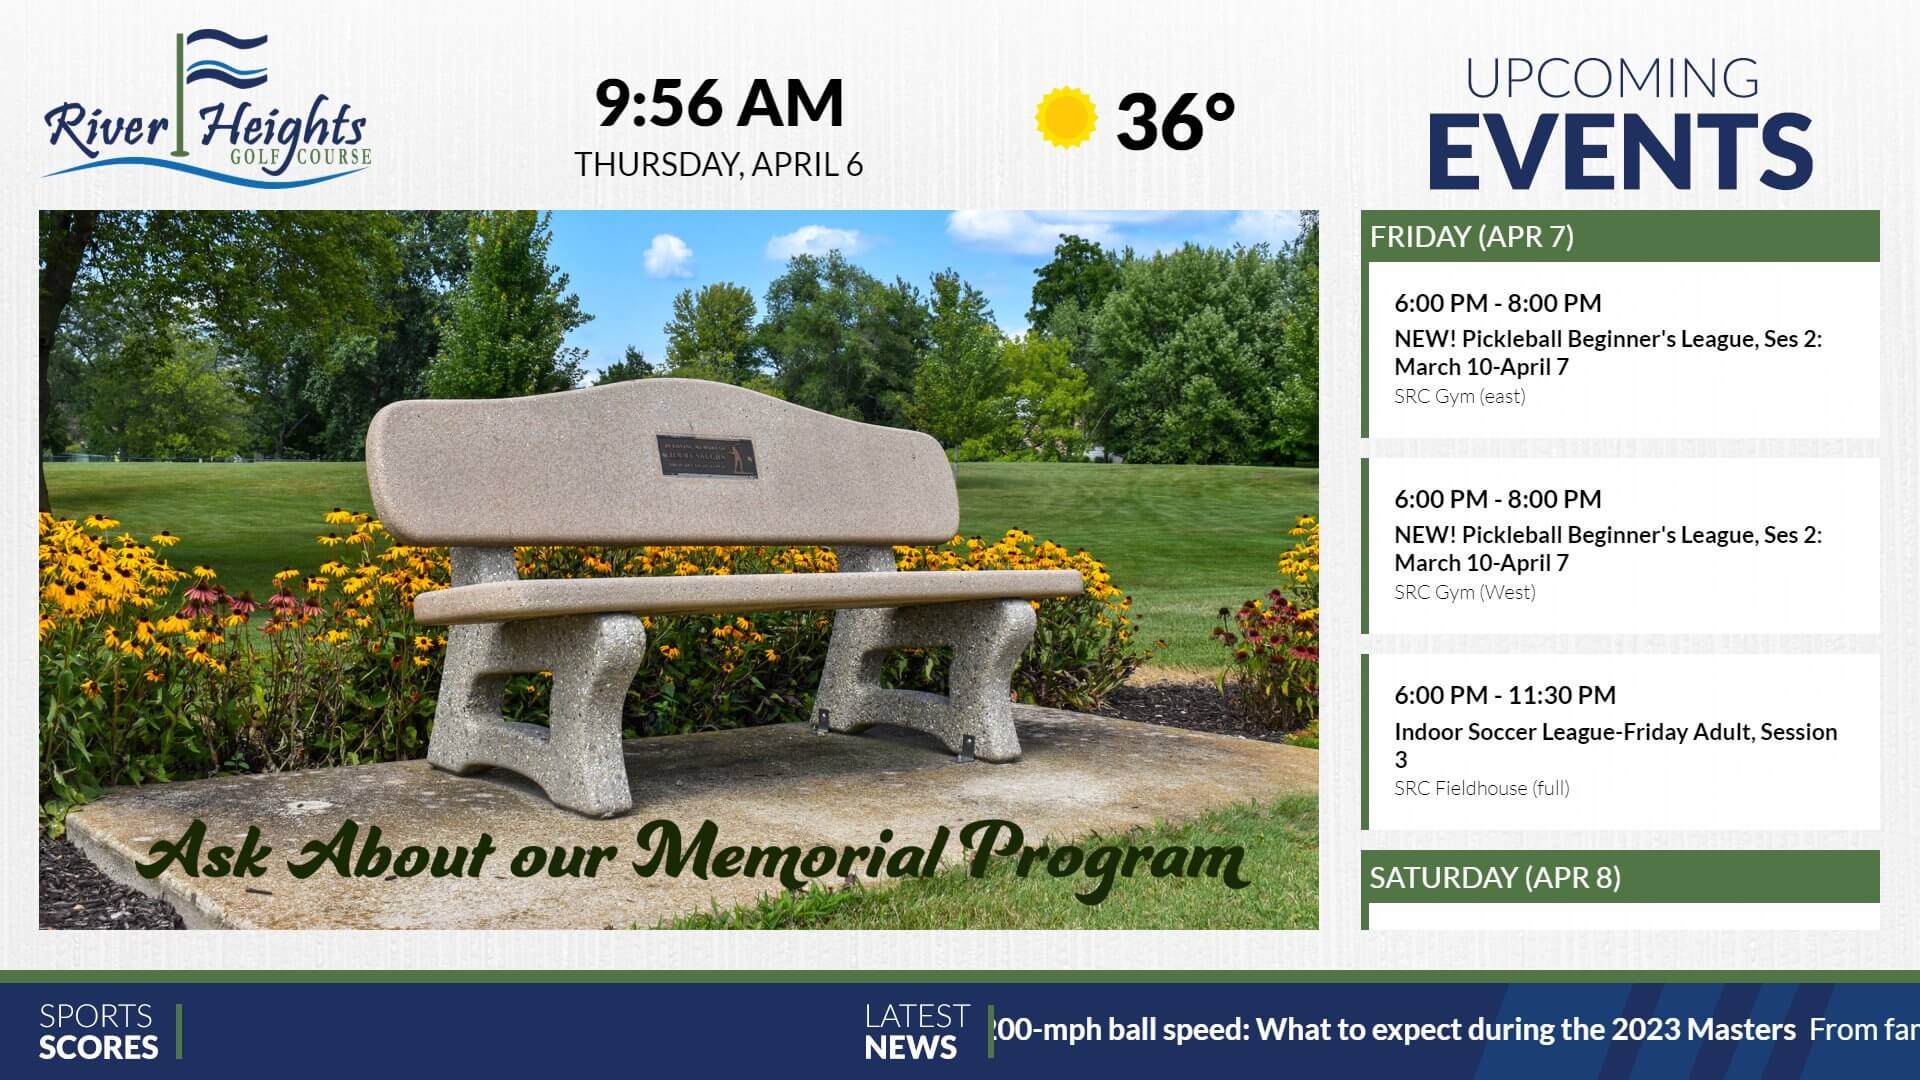 The image shows a digital signage layout for River Heights Golf Course displaying a calendar of upcoming events, a news ticker, sports scores, an announcement area, current time, date and weather.